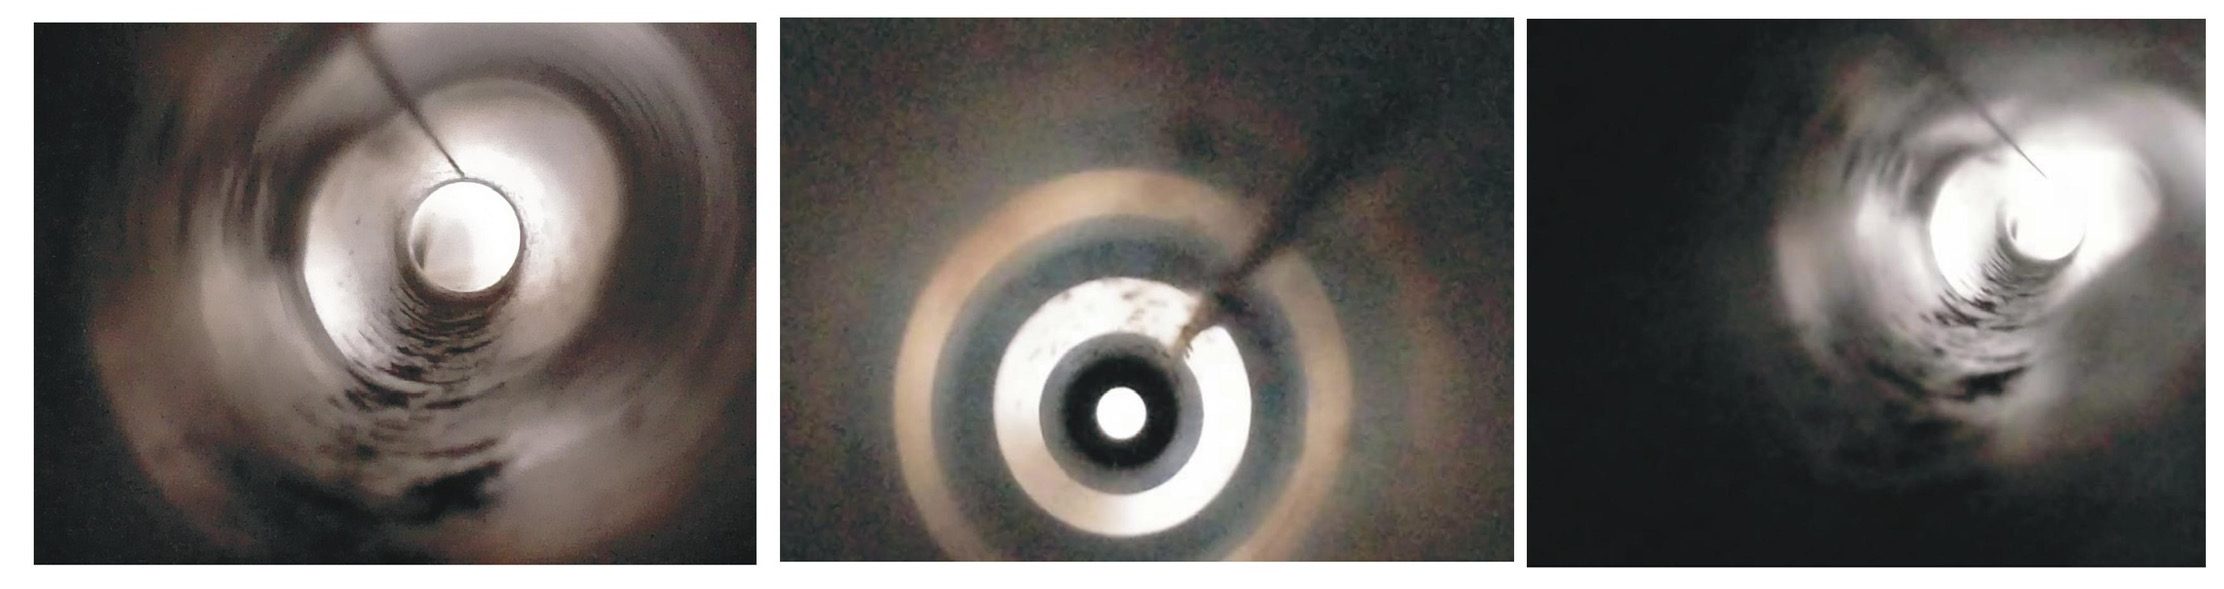 Video images of hollow round tube